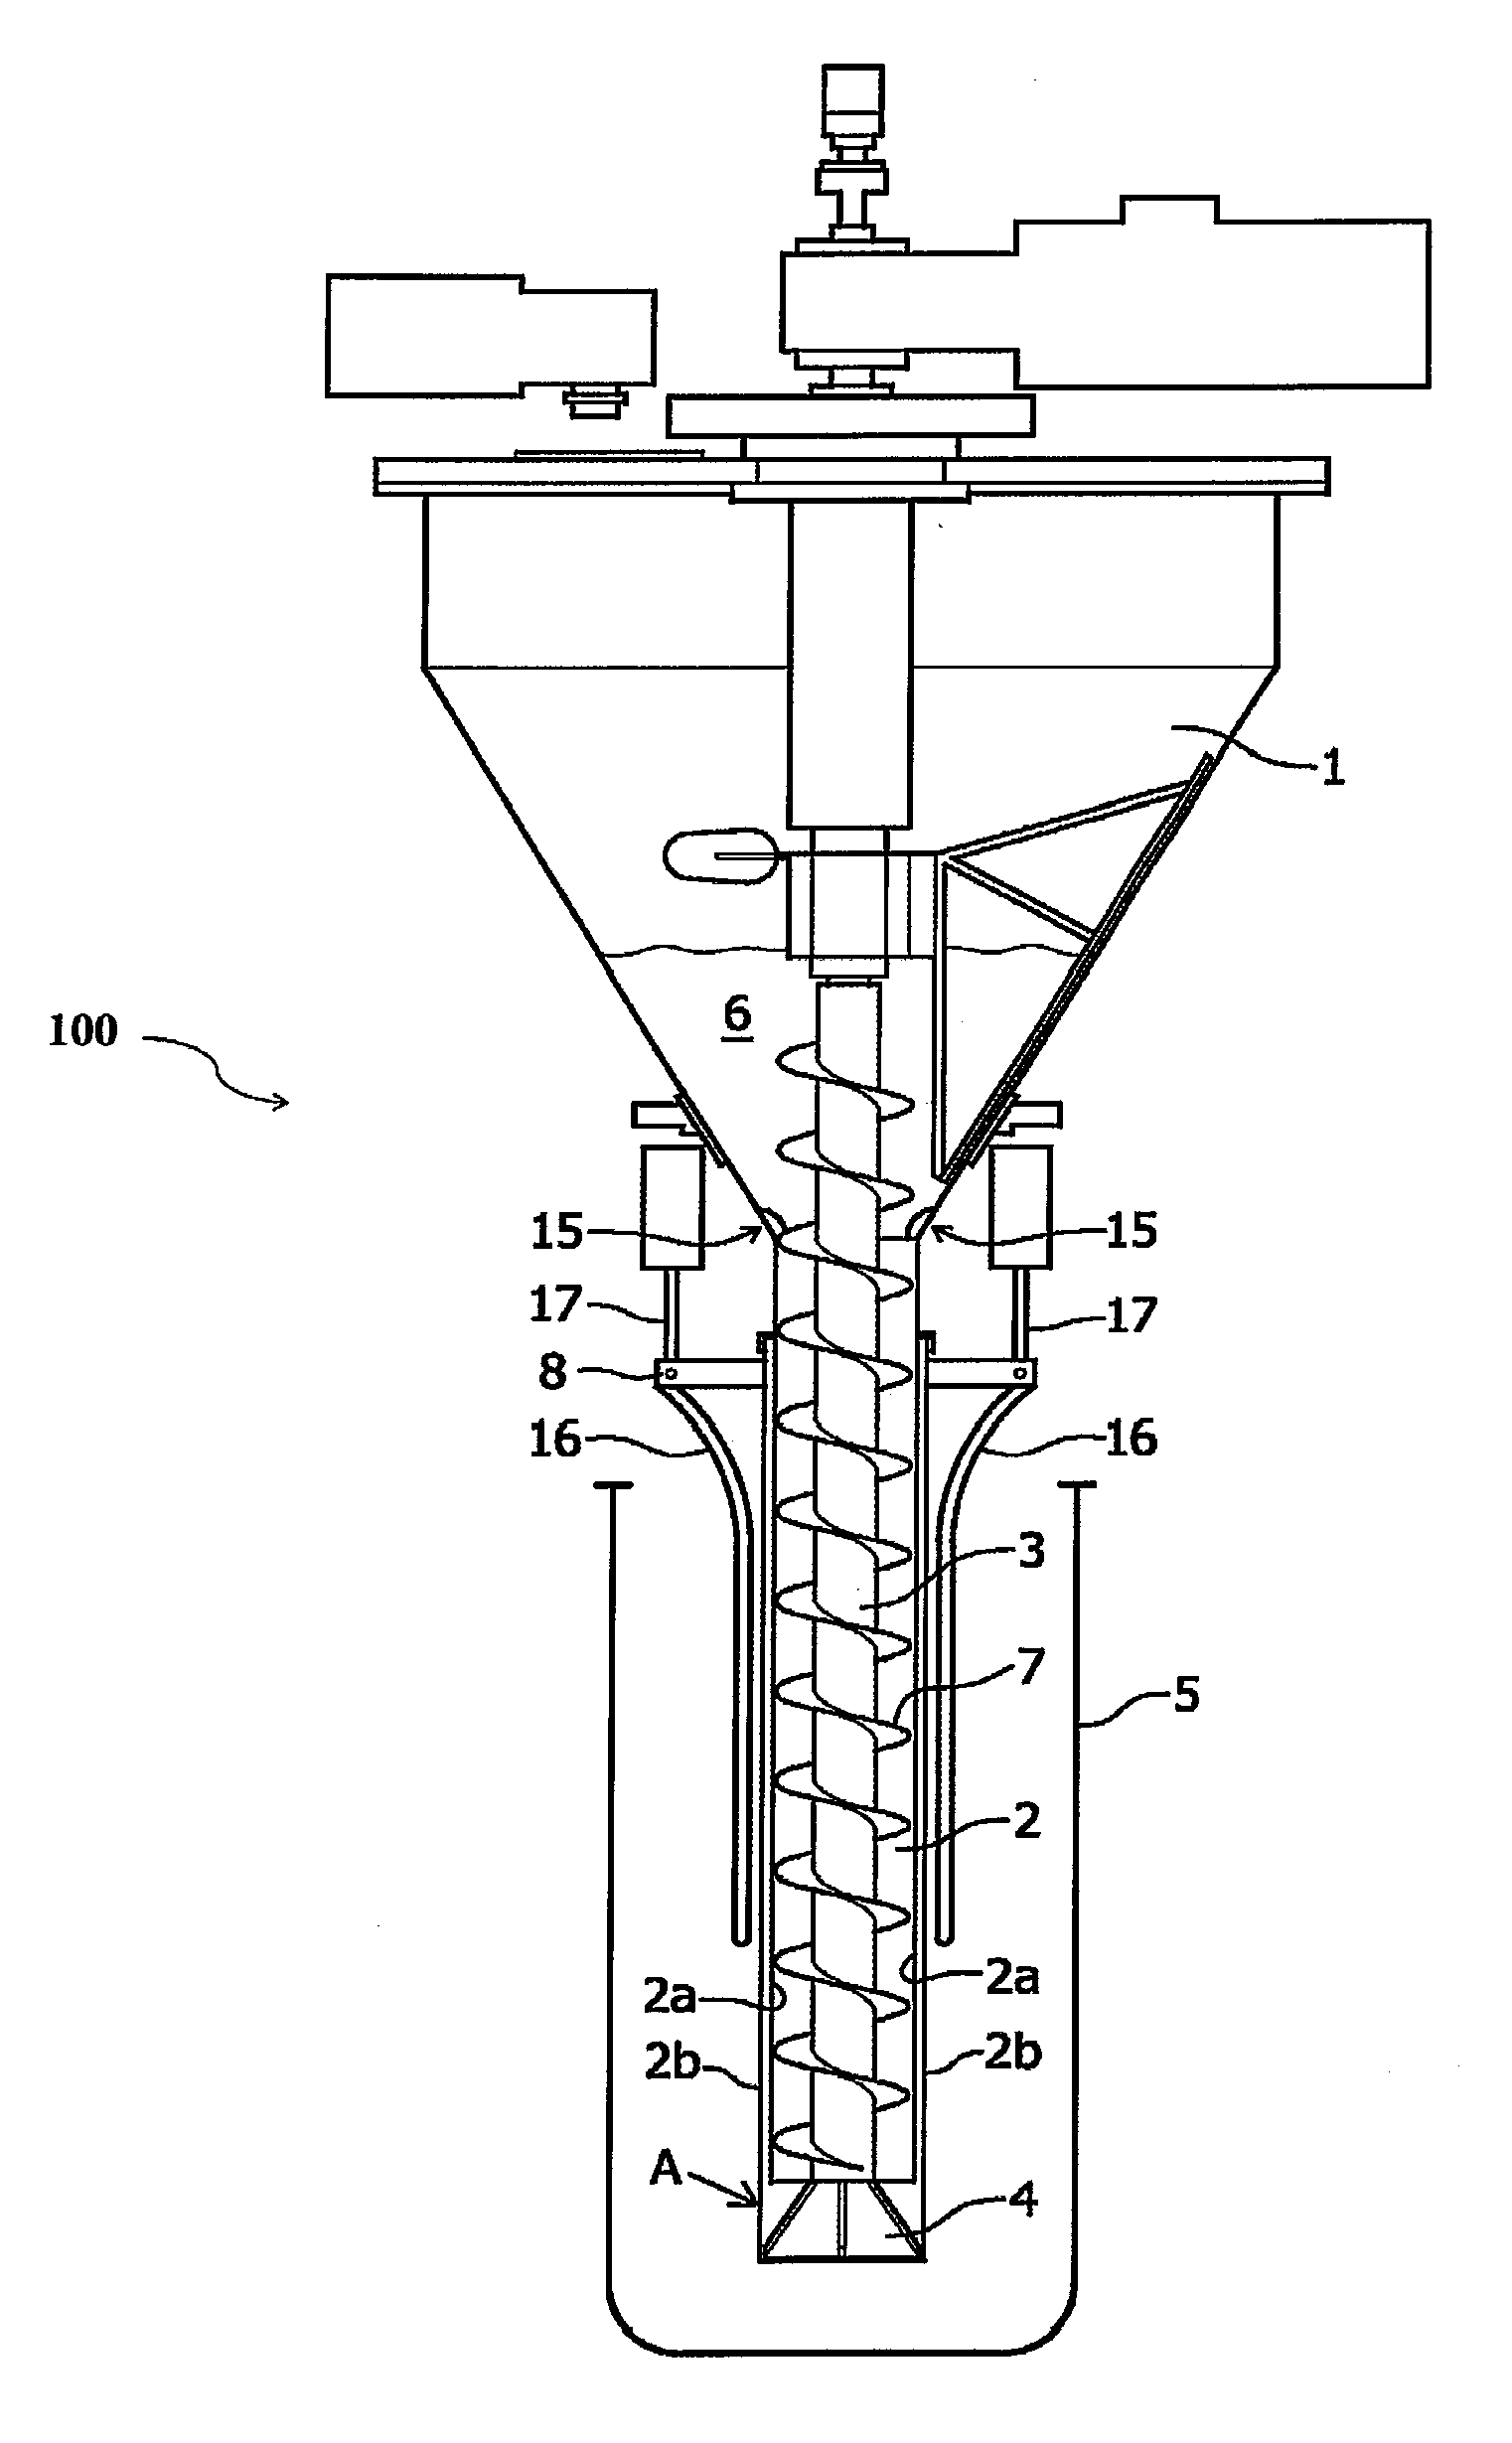 Device and method for packaging bulk material